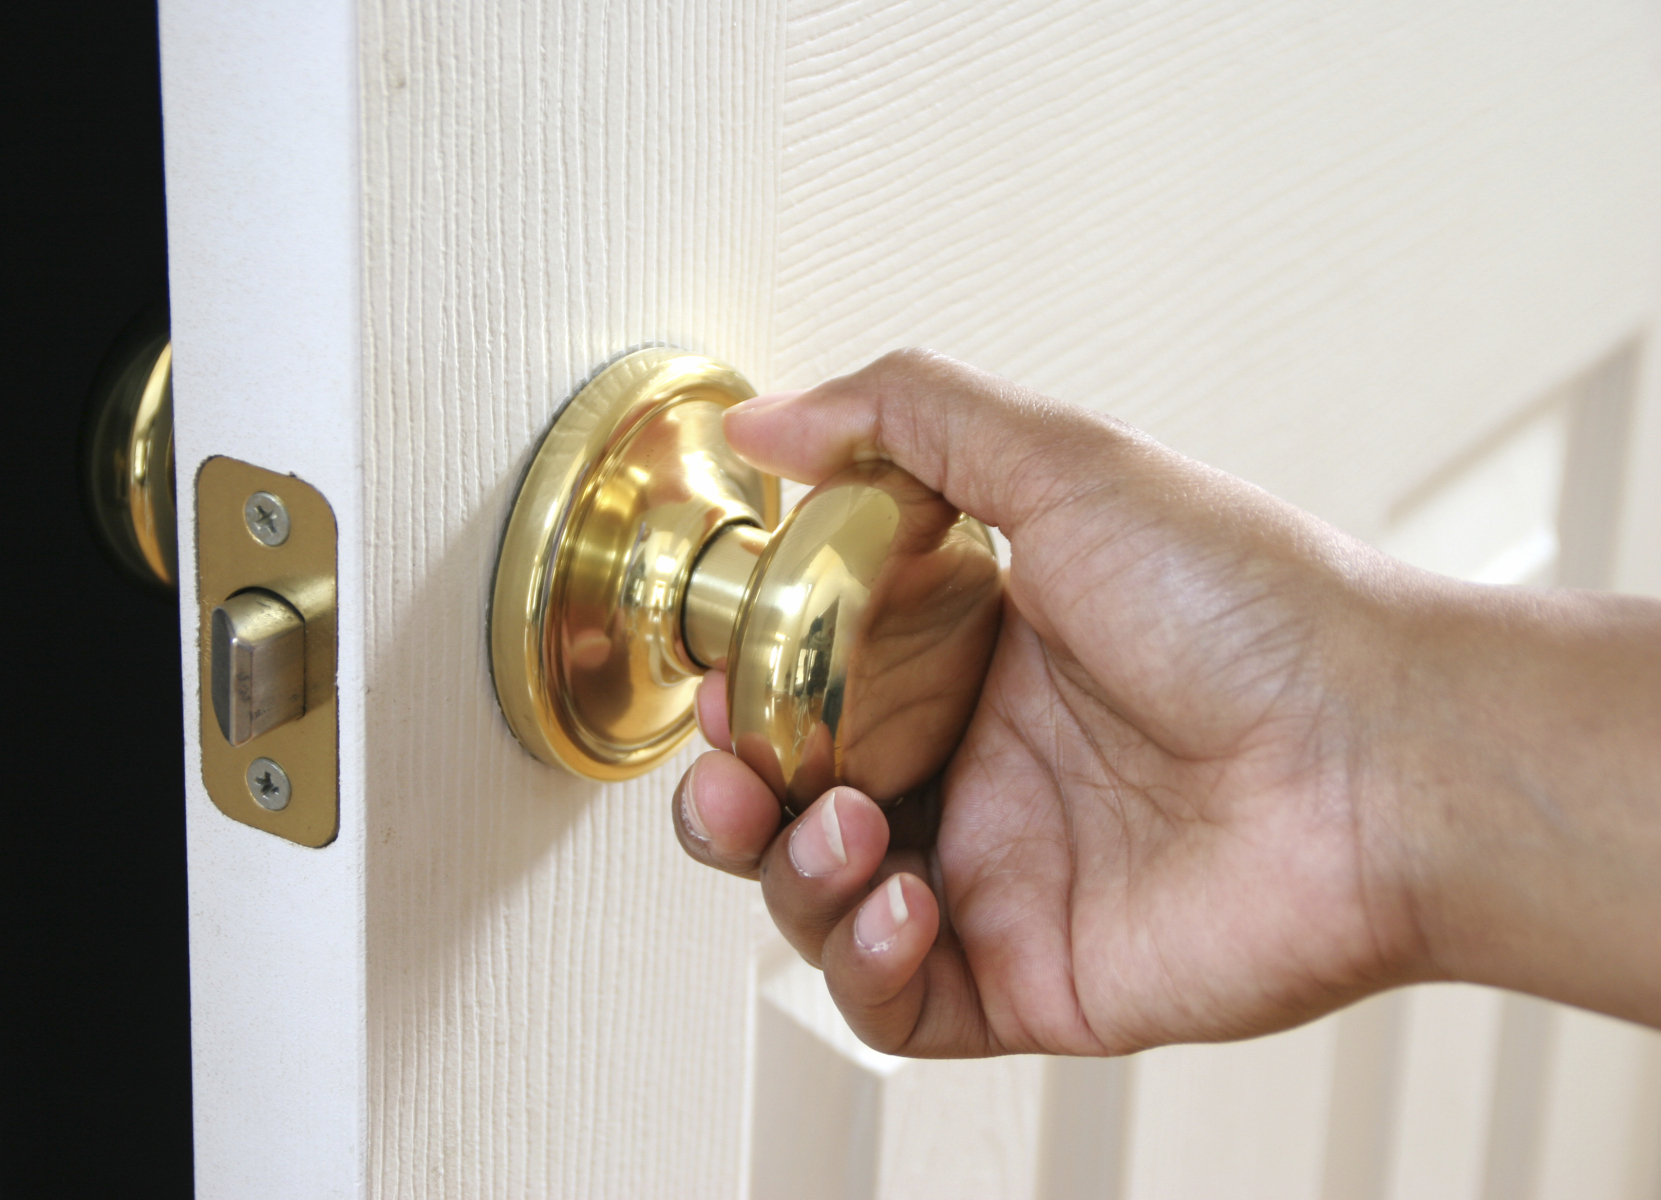 House Cleaning Mistake #1 is Neglecting your door handles and knobs